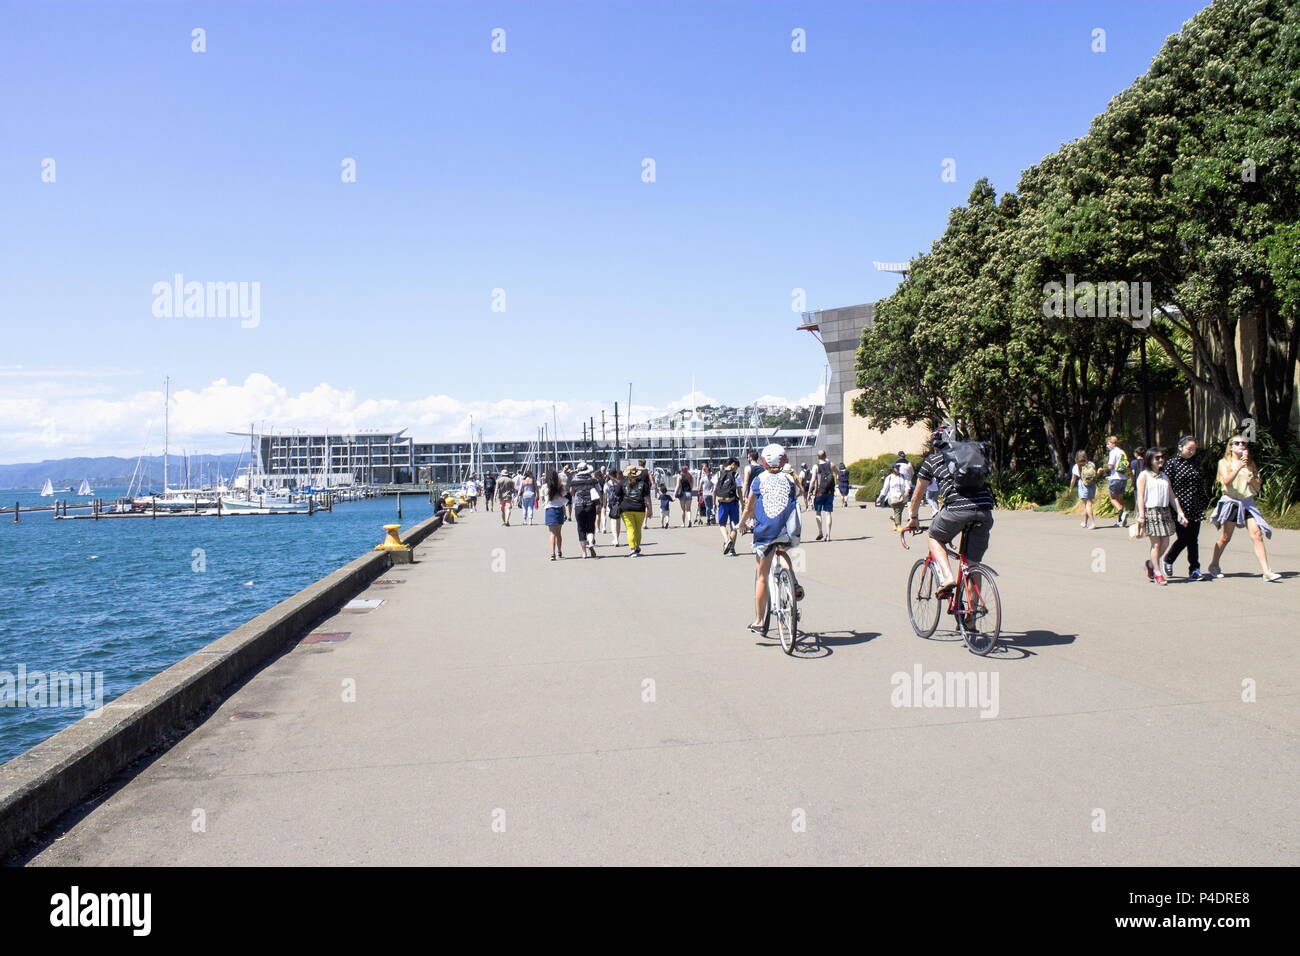 Wellington, New Zealand - 13 February  2016: People out enjoying sunny weather in summer along the Wellington Waterfront with copy space. Stock Photo